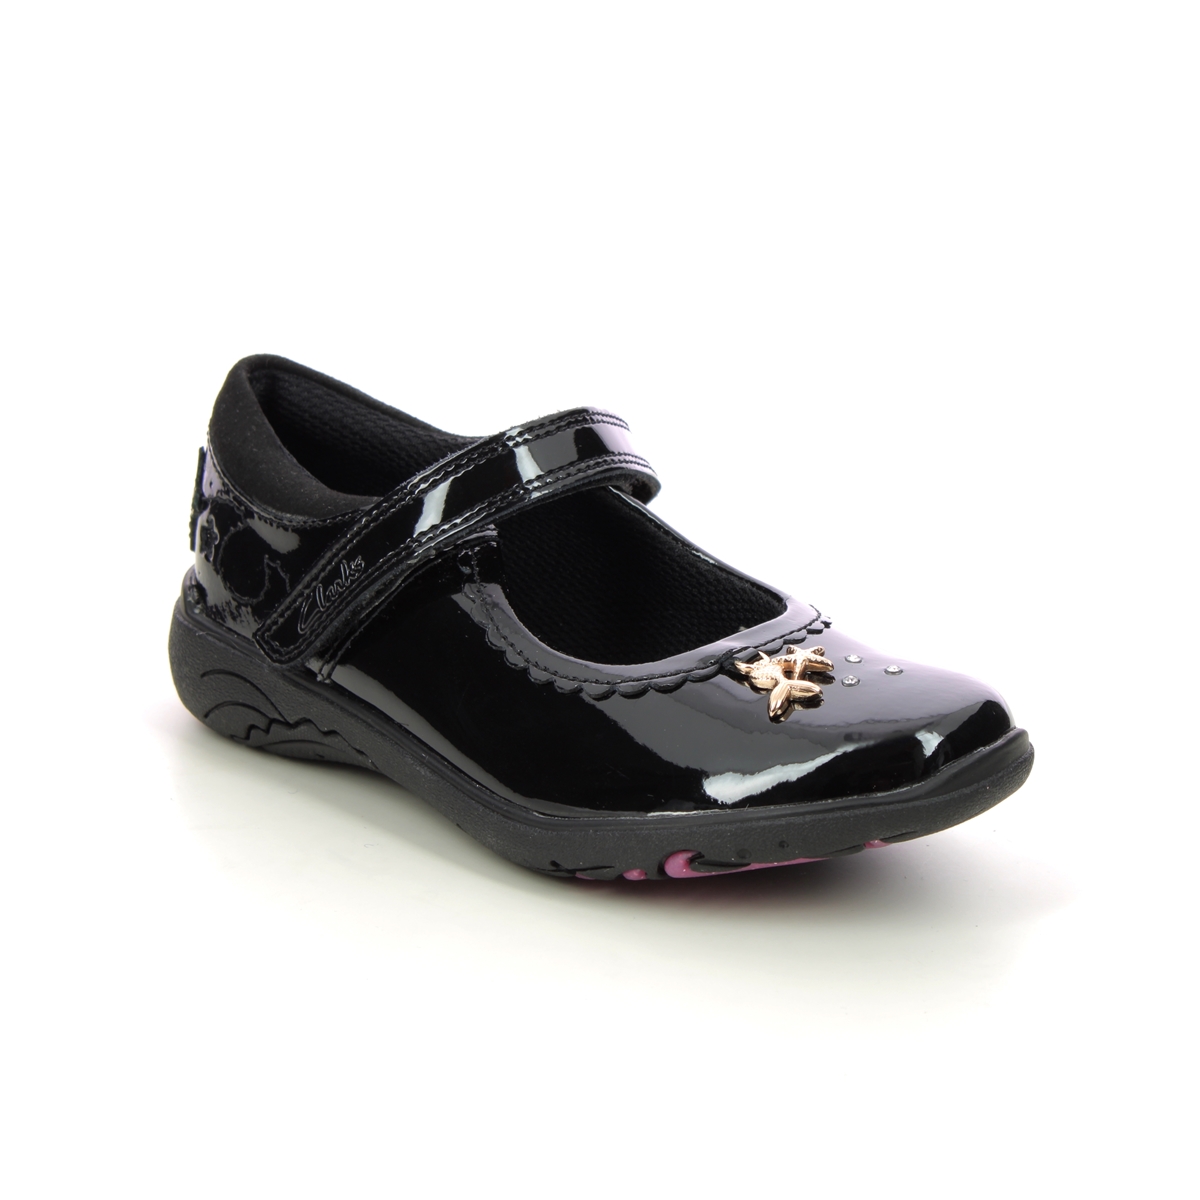 Clarks Relda Sea K Mary Jane Black Patent Kids Girls School Shoes 722418H In Size 10 In Plain Black Patent H Width Fitting Extra Wide For School For k